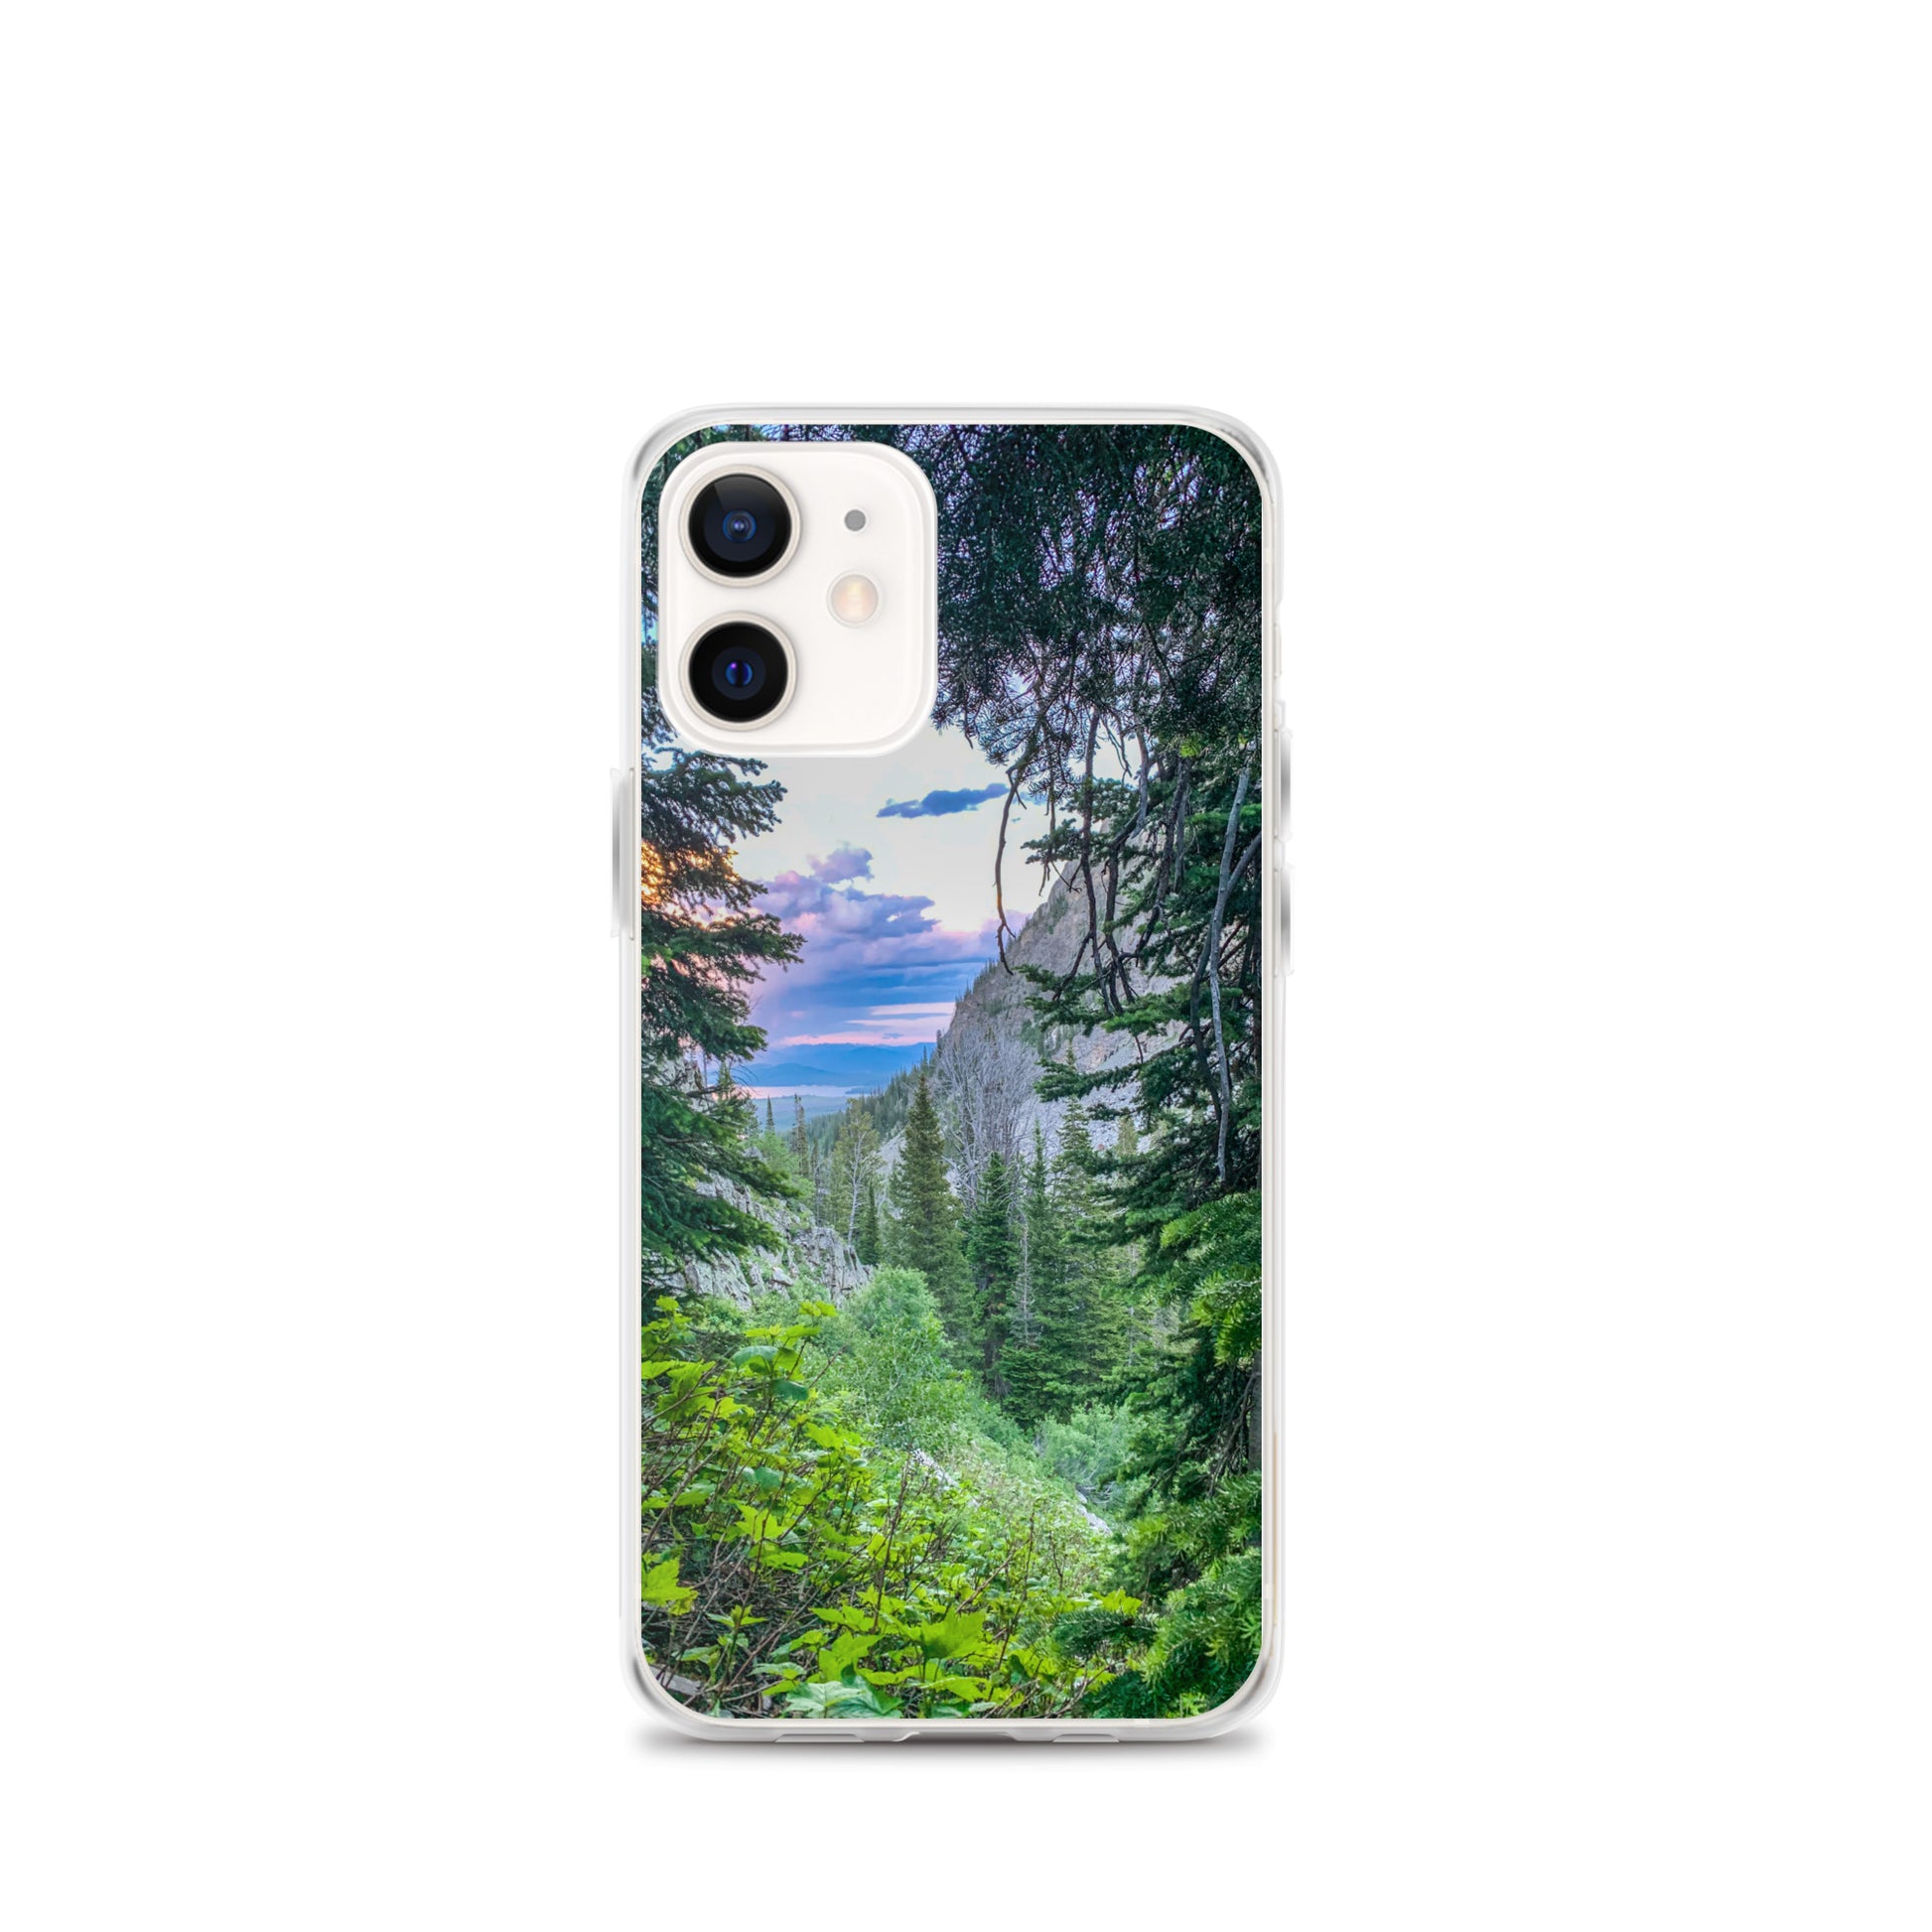 Through the Pines (iPhone Case) - Comfortable Culture - iPhone 12 mini - Mobile Phone Cases - Comfortable Culture